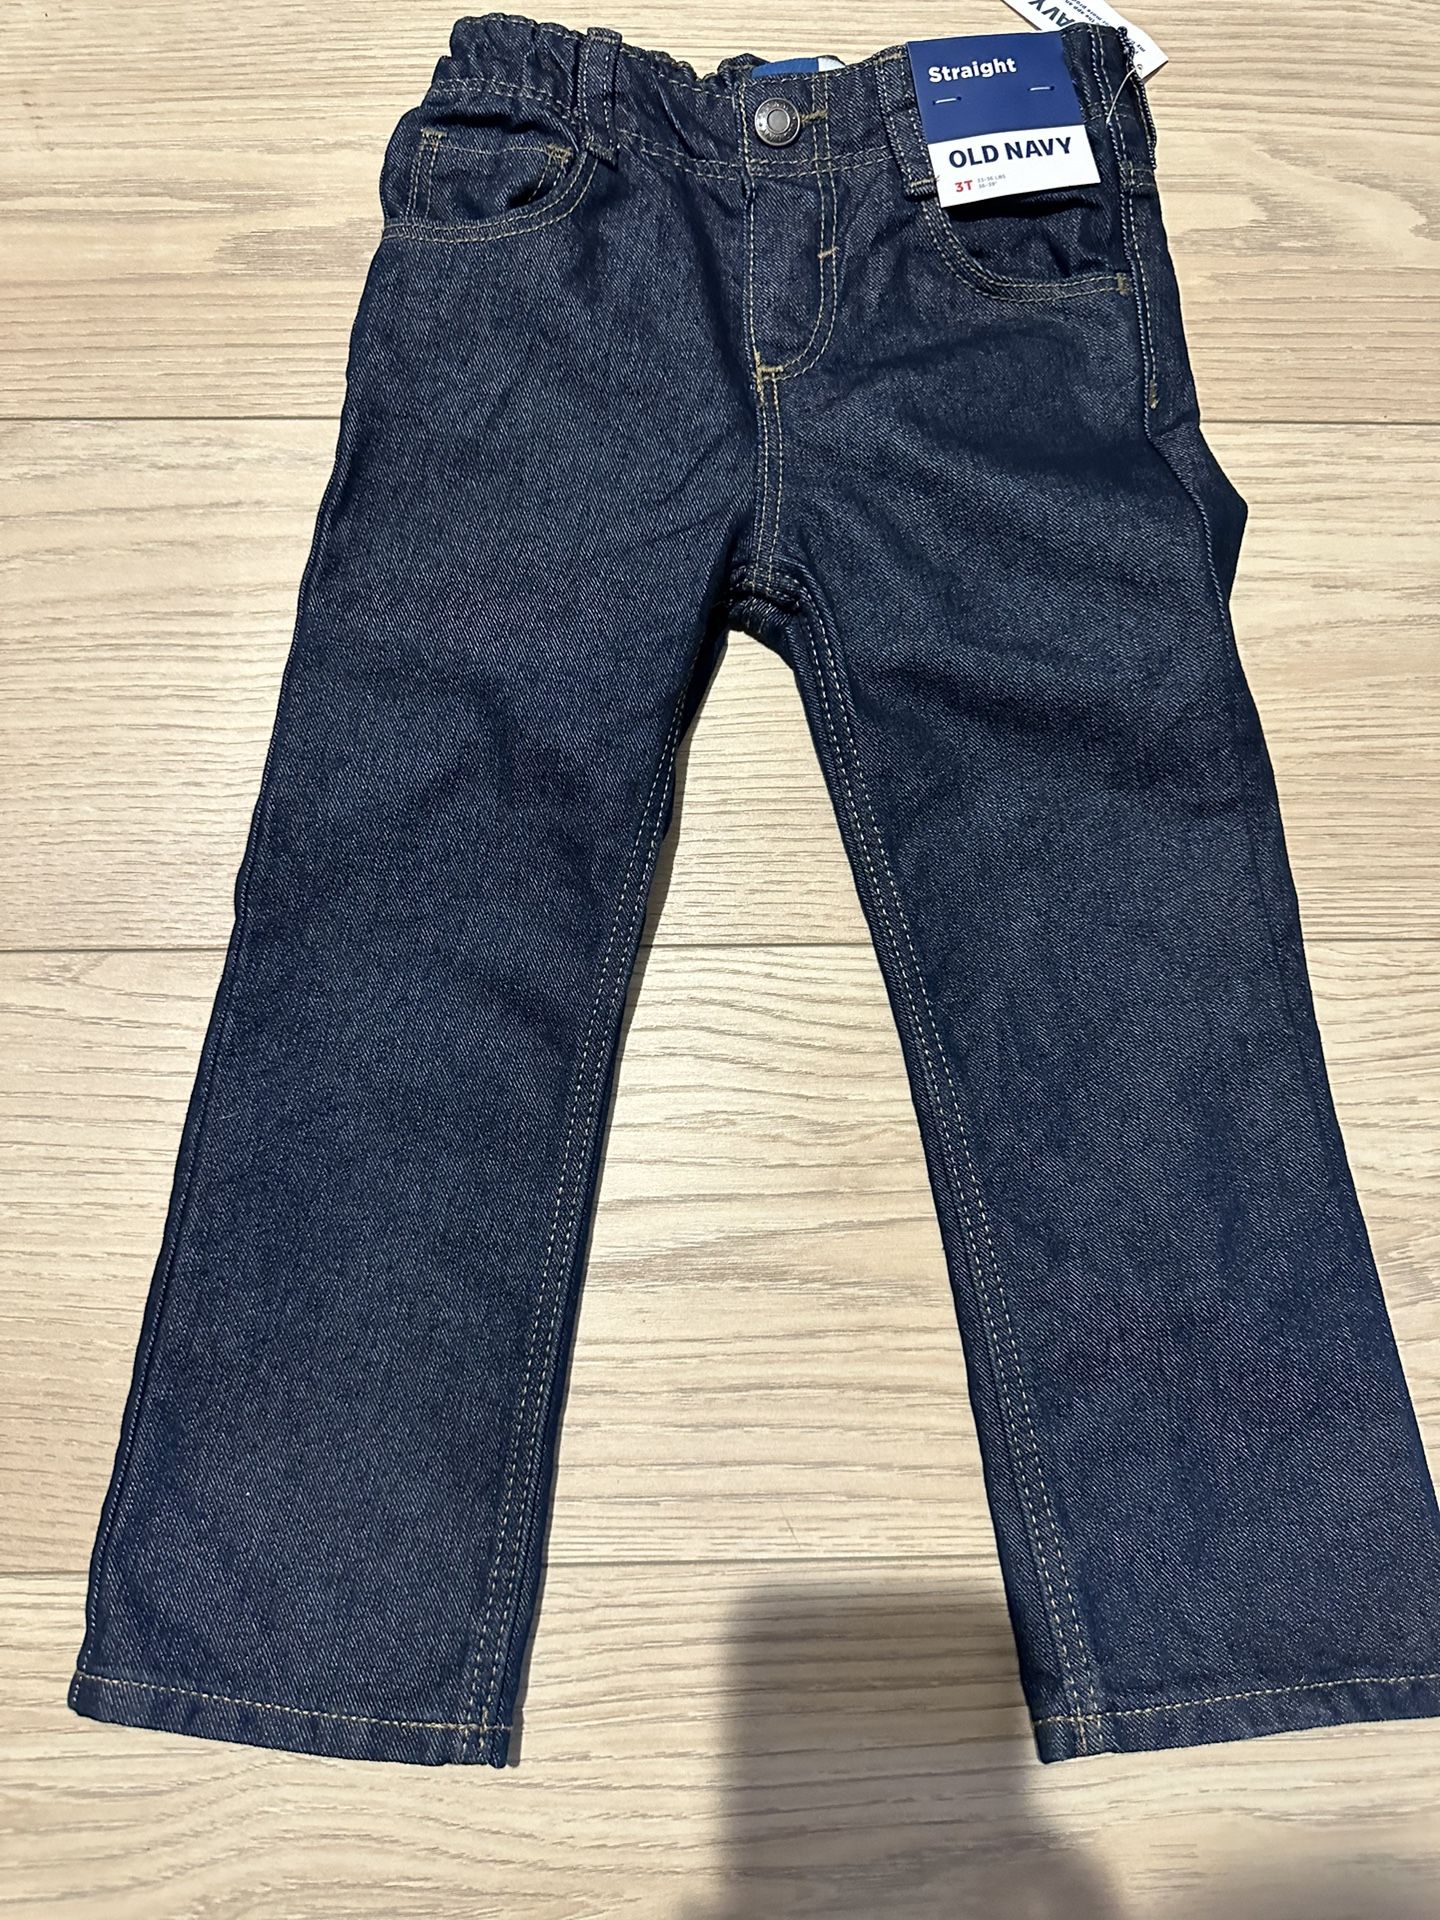 Toddle Boys’ Old Navy Jeans